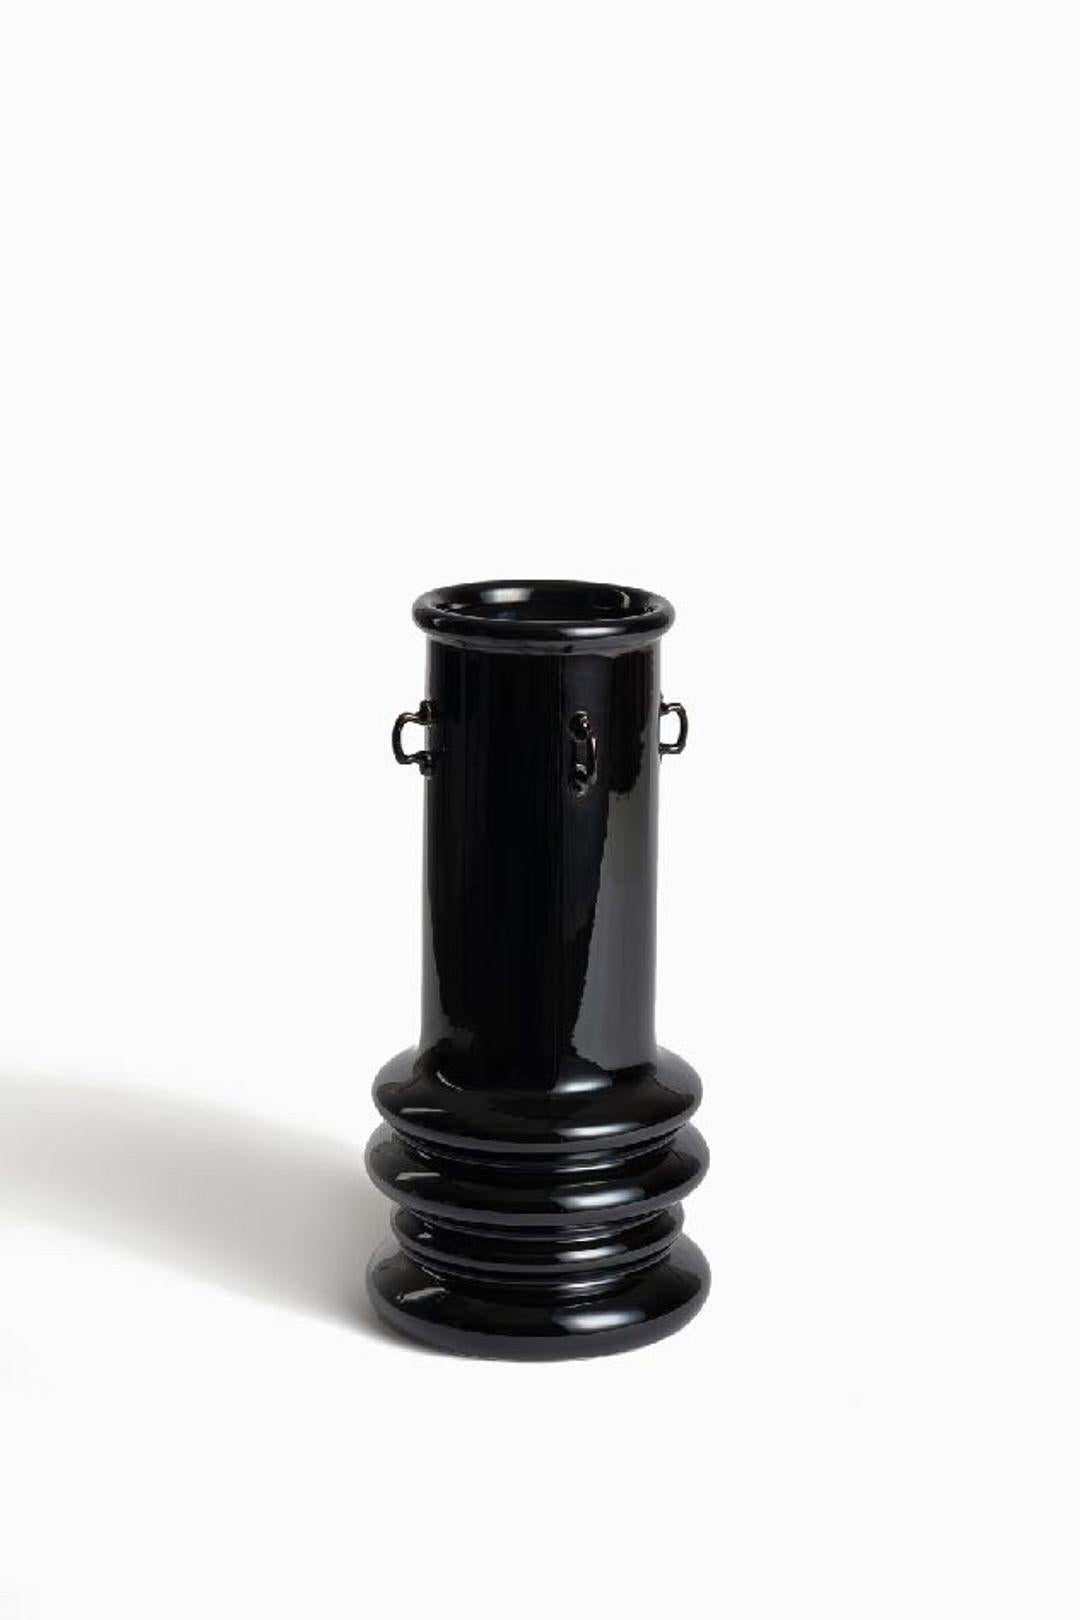 Chinese The Unspoken Black Ceramic Vase by Hua Wang For Sale